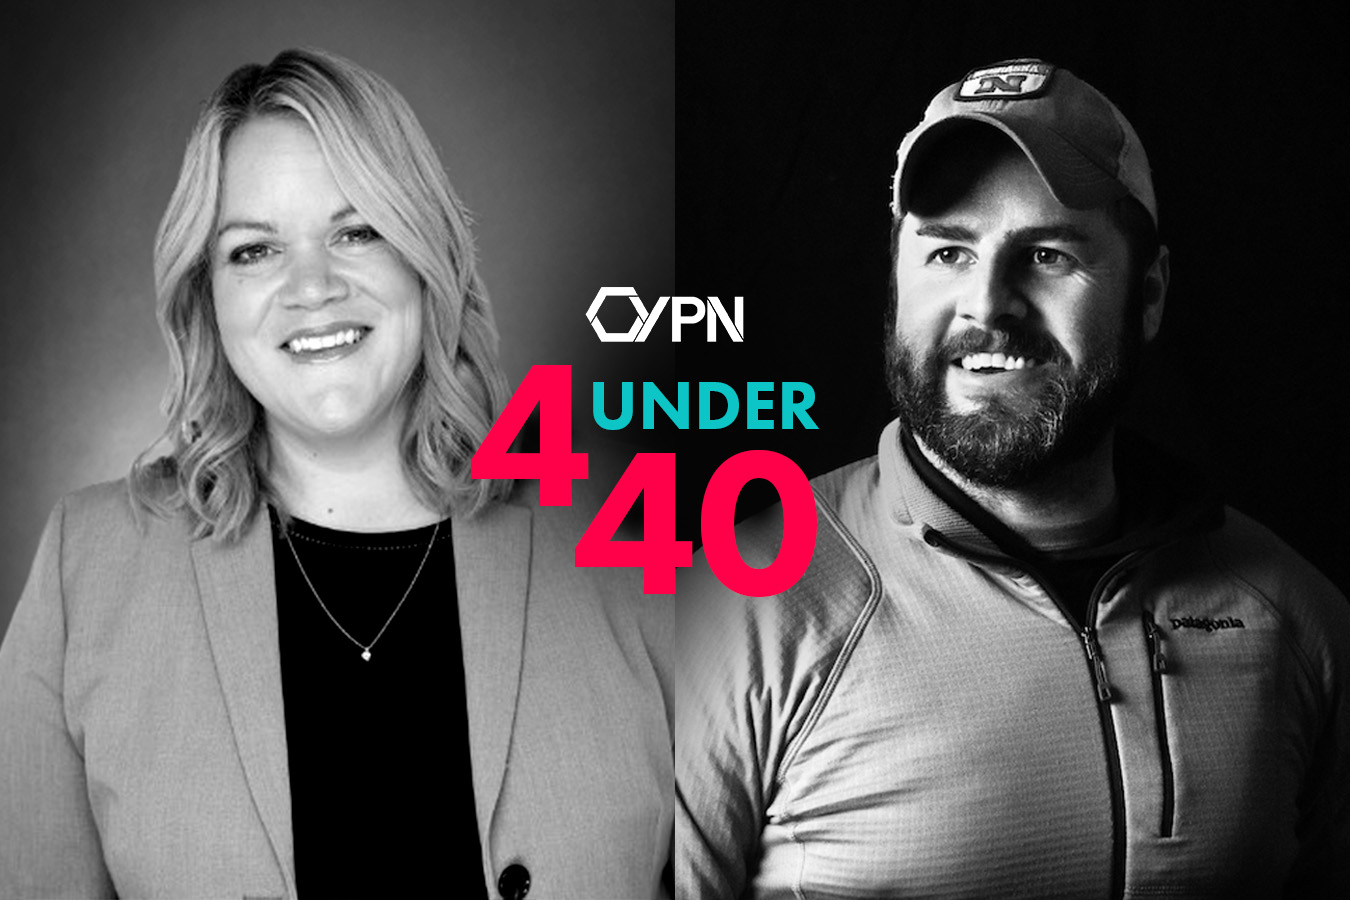 Podhradsky and Peschong, nominees for YPN 4 under 40